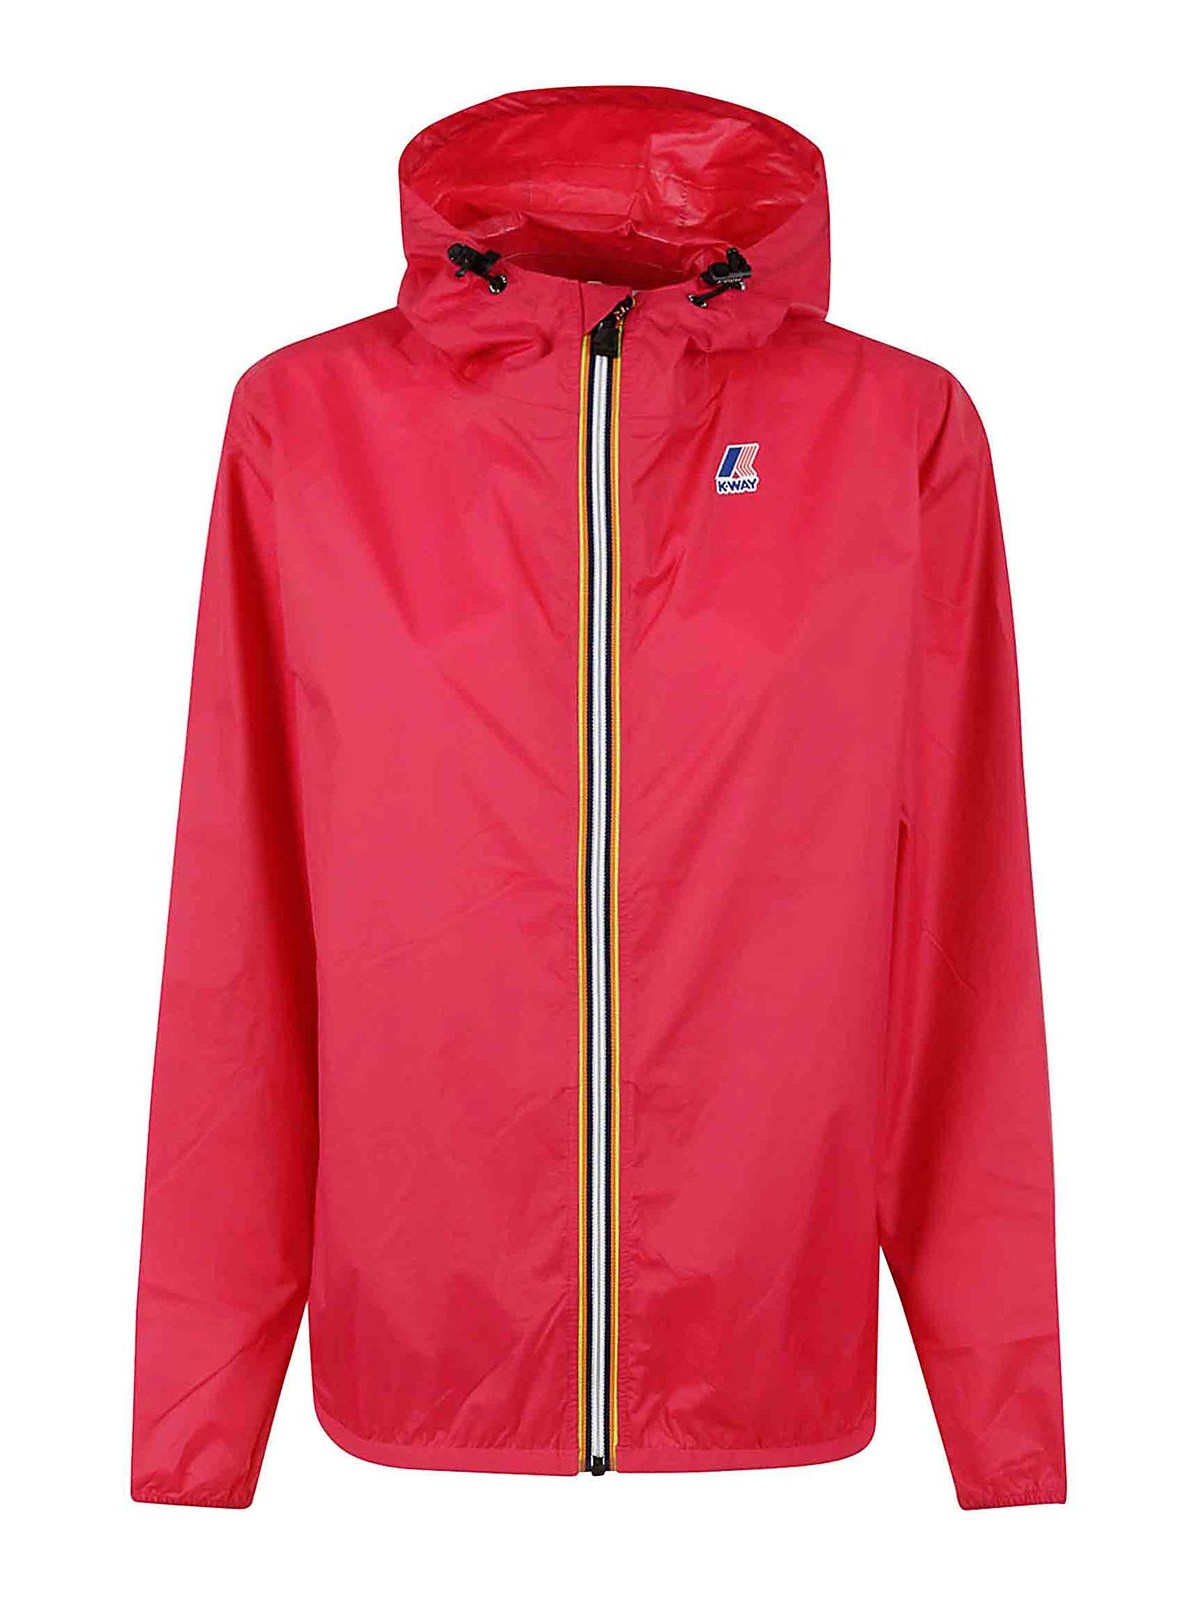 K-way Jacket In Red